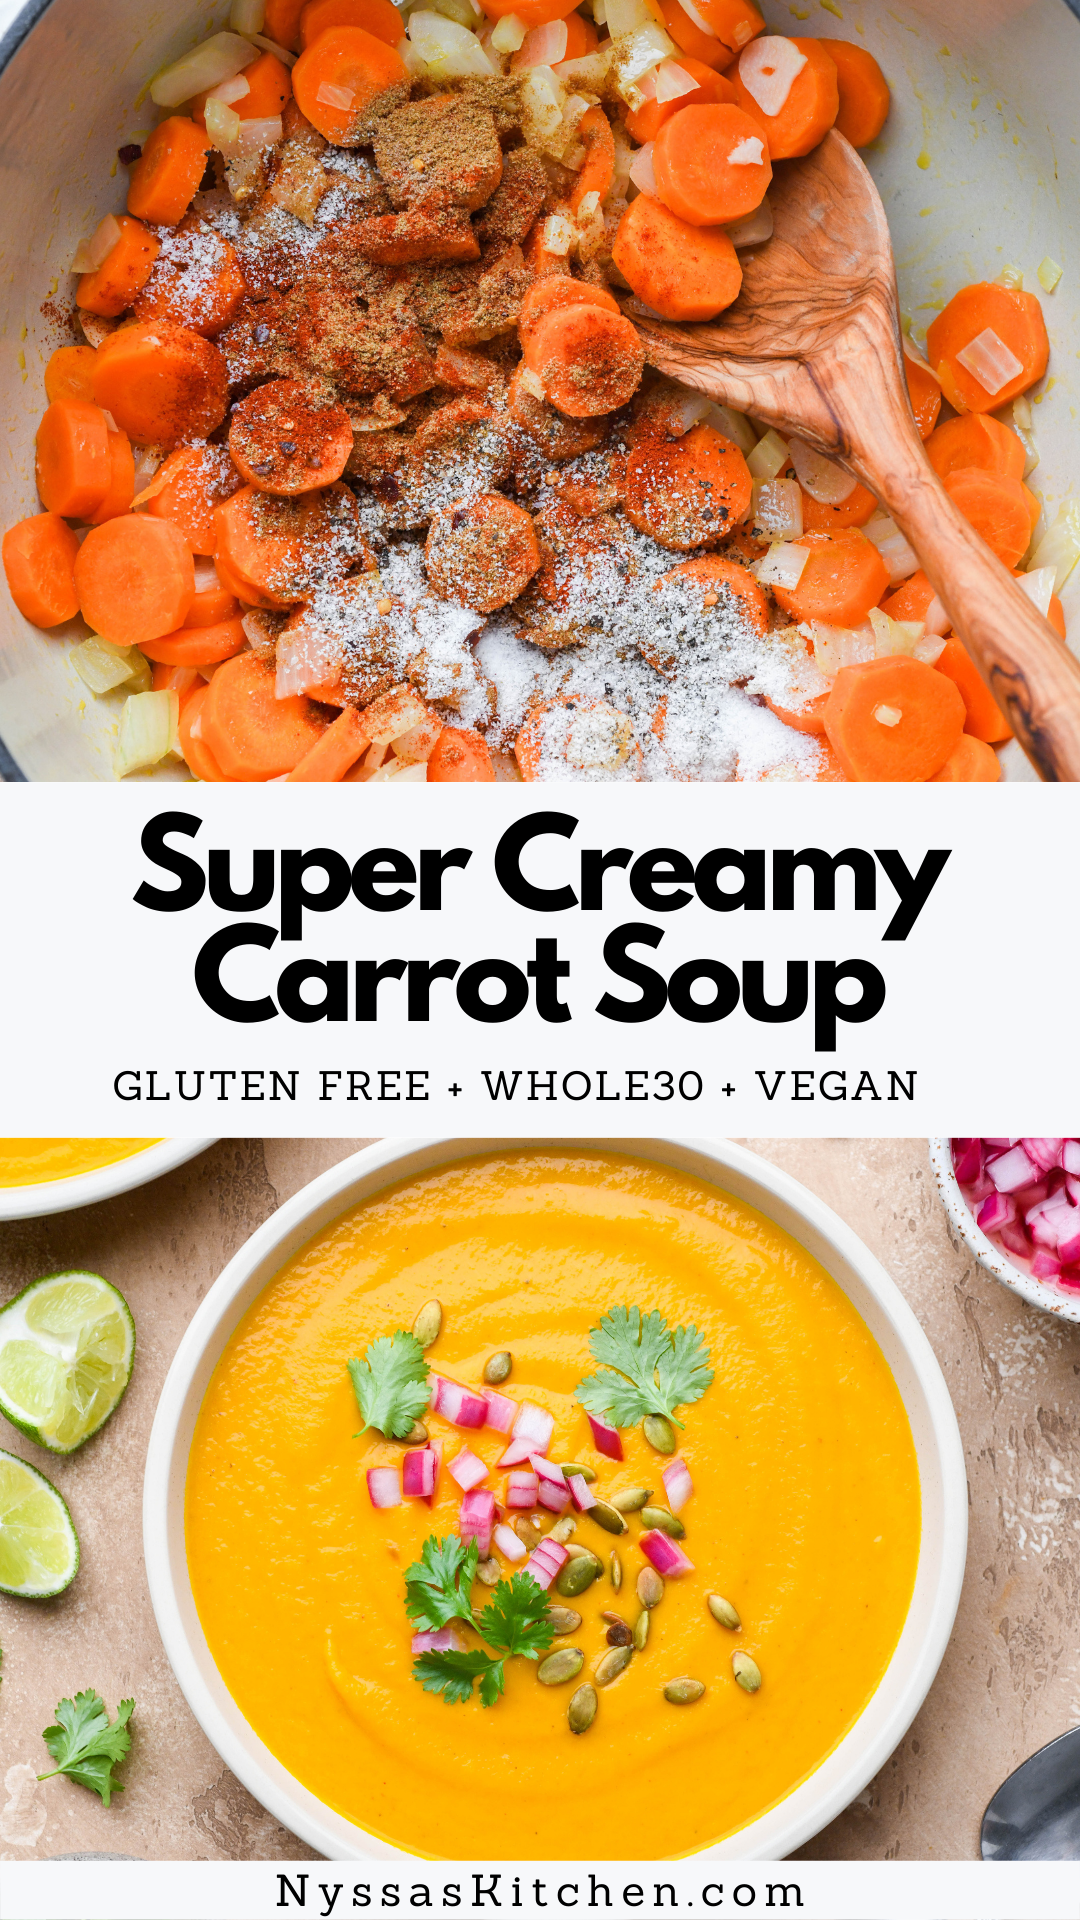 This super creamy carrot soup is an essential fall soup season recipe! It is easy to make, healthy, and perfectly spiced. The garnishes of pumpkin seeds, cilantro, and pickled red onions give it just the right amount of bright flavor and interesting texture to keep you coming back for another bite. Would make an excellent addition to your Thanksgiving menu! Whole30, vegan, gluten free, nut free, and dairy free.